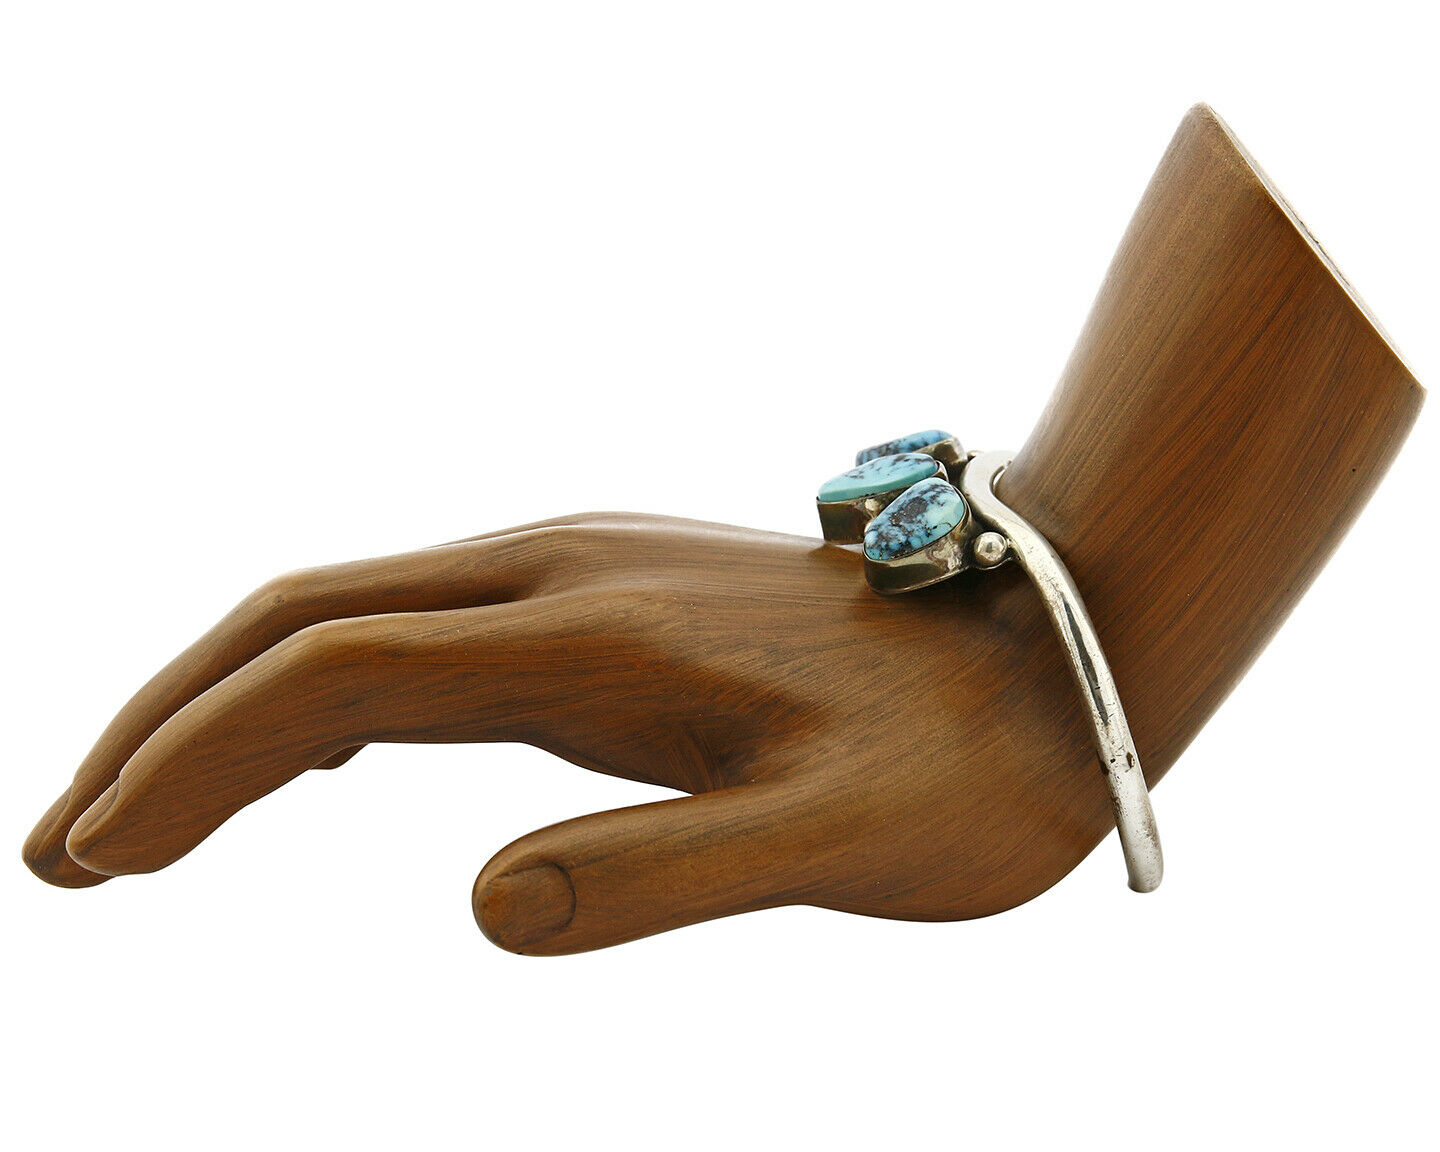 Navajo Natural Blue Turquoise .925 SOLID Silver Cuff Bracelet